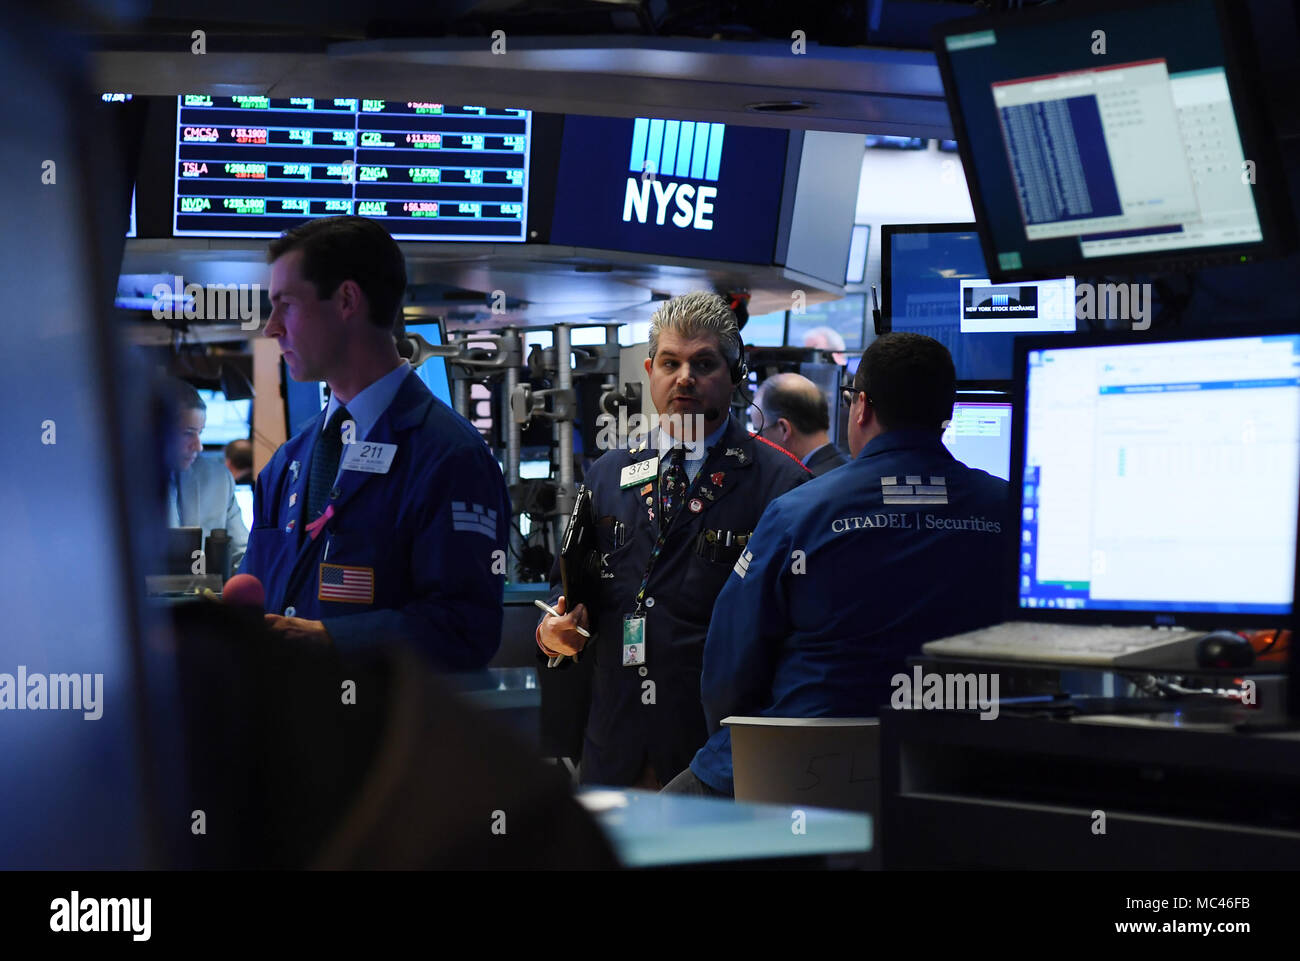 New York, USA. 12th Apr, 2018. Traders work at the New York Stock Exchange in New York, the United States, on April 12, 2018. U.S. stocks closed higher on Thursday. The Dow Jones Industrial Average gained 293.60 points, or 1.21 percent, to 24,483.05. The S&P 500 rose 21.80 points, or 0.83 percent, to 2,663.99. The Nasdaq Composite Index was up 71.22 points, or 1.01 percent, to 7,140.25. Credit: Li Rui/Xinhua/Alamy Live News Stock Photo